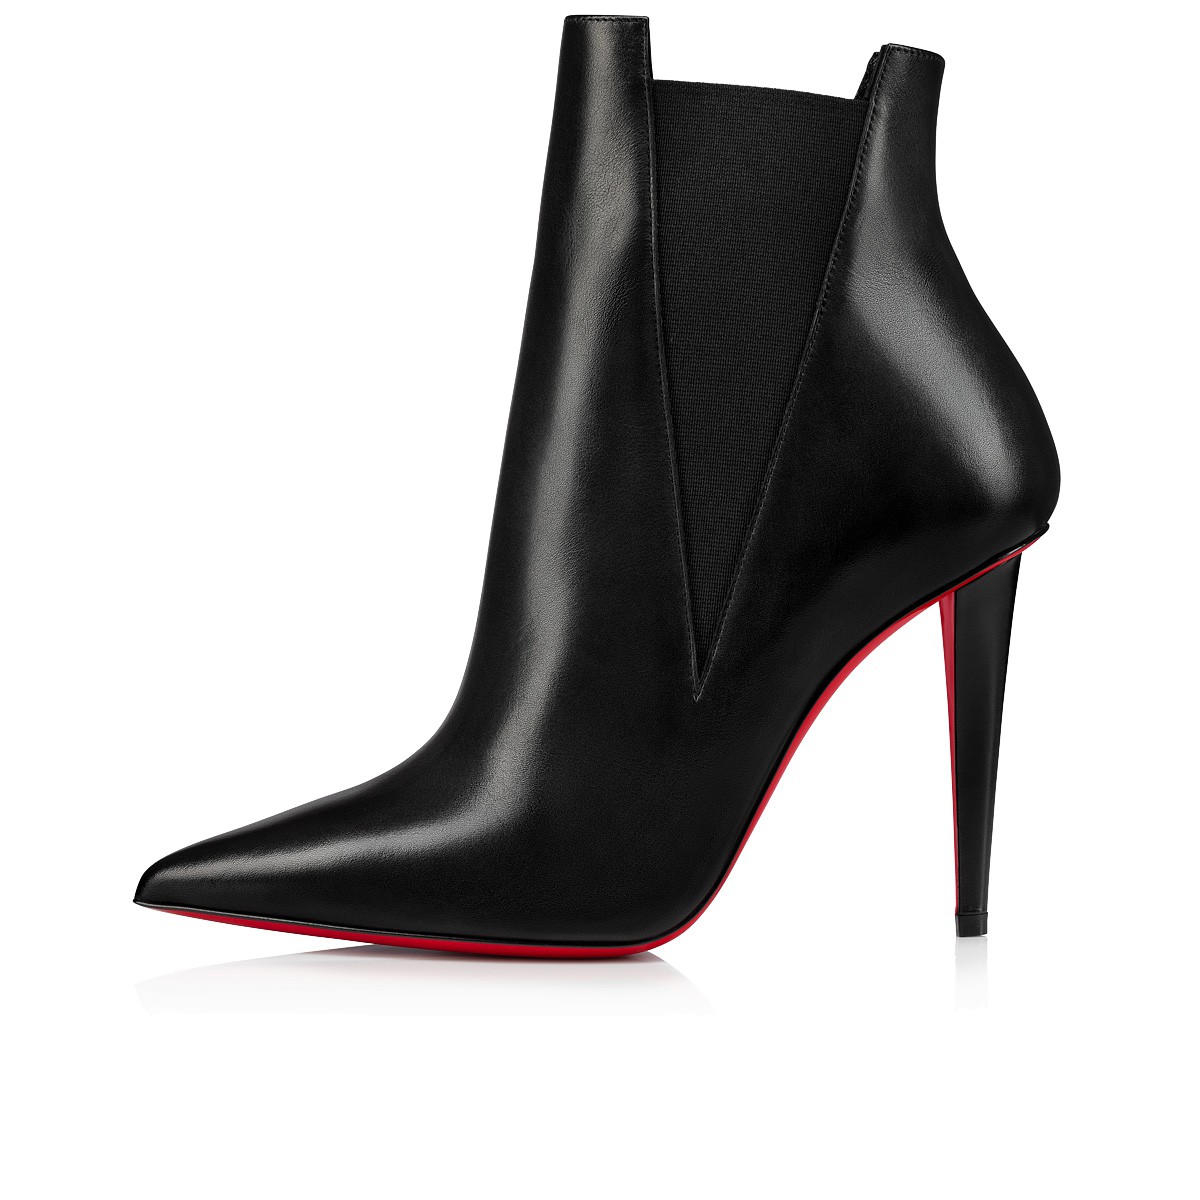 Shoes - Astribooty - Christian Louboutin